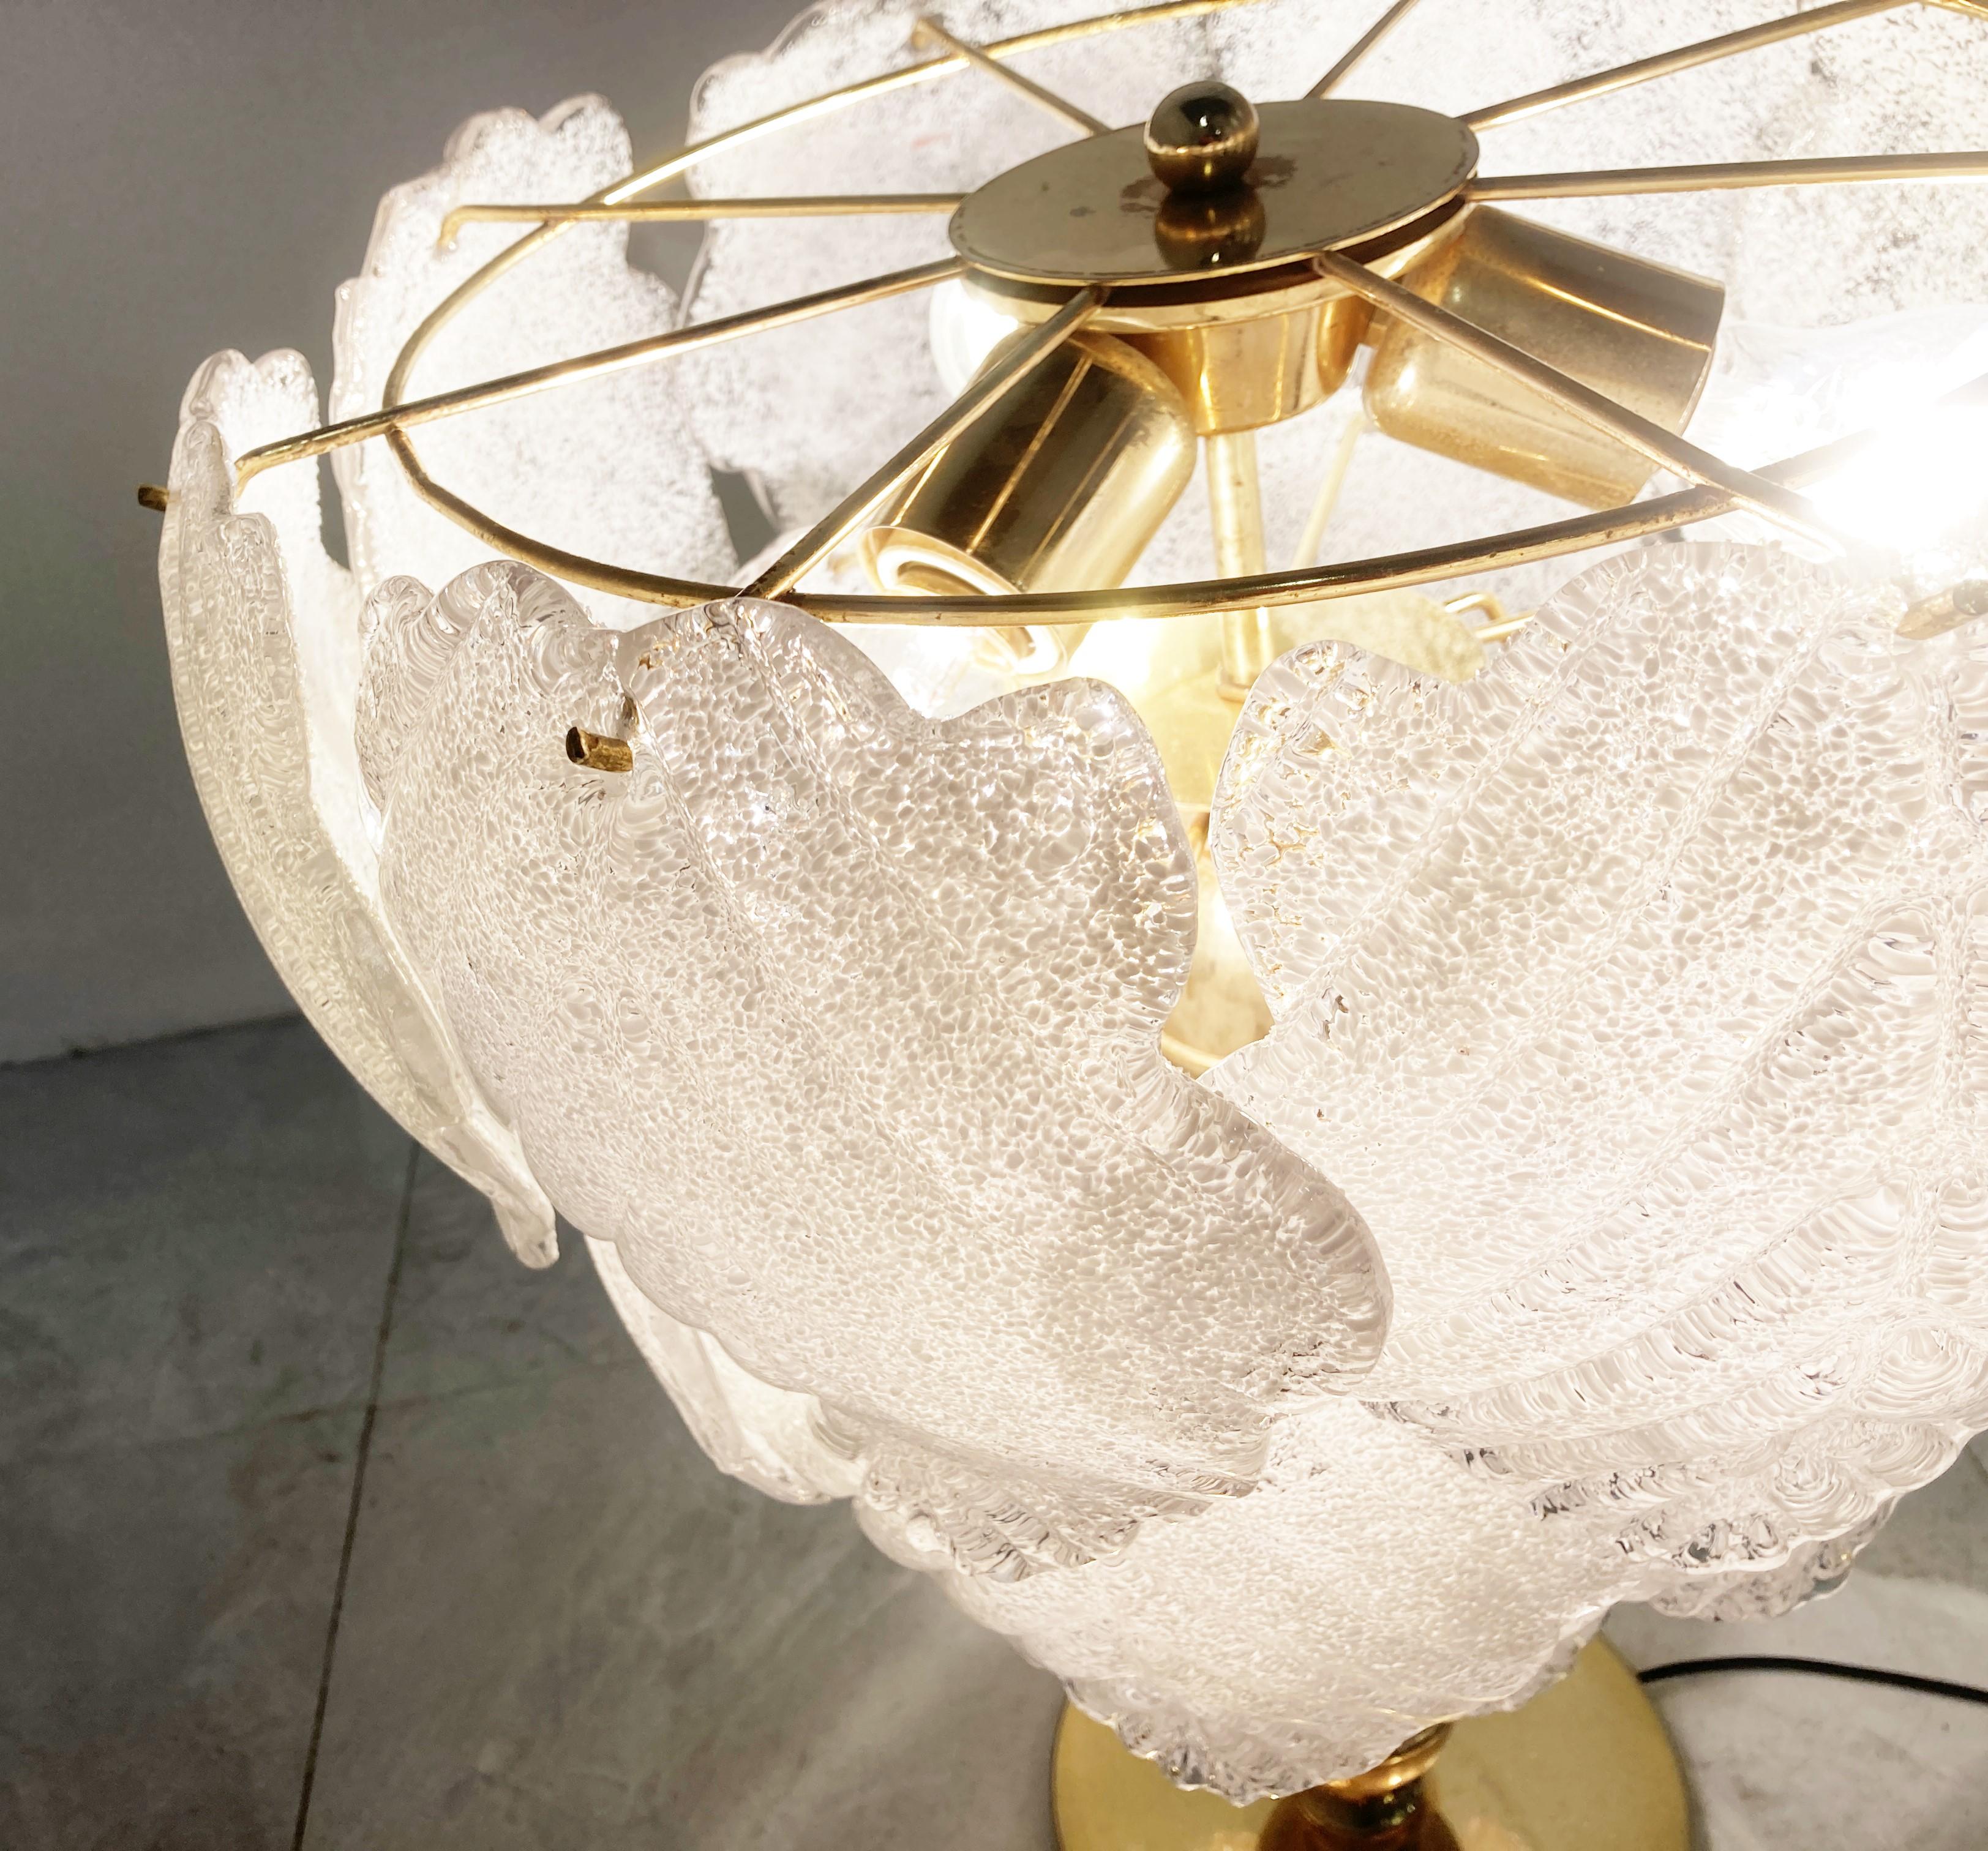 Vintage brass table lamp with hand made murano frosted glass leafs.

The lamp looks beautiful and emits a nice soft light.

Very good condition.

Tested and ready to use with E27 light bulbs.

1970s - Italy

Dimensions:
Height: